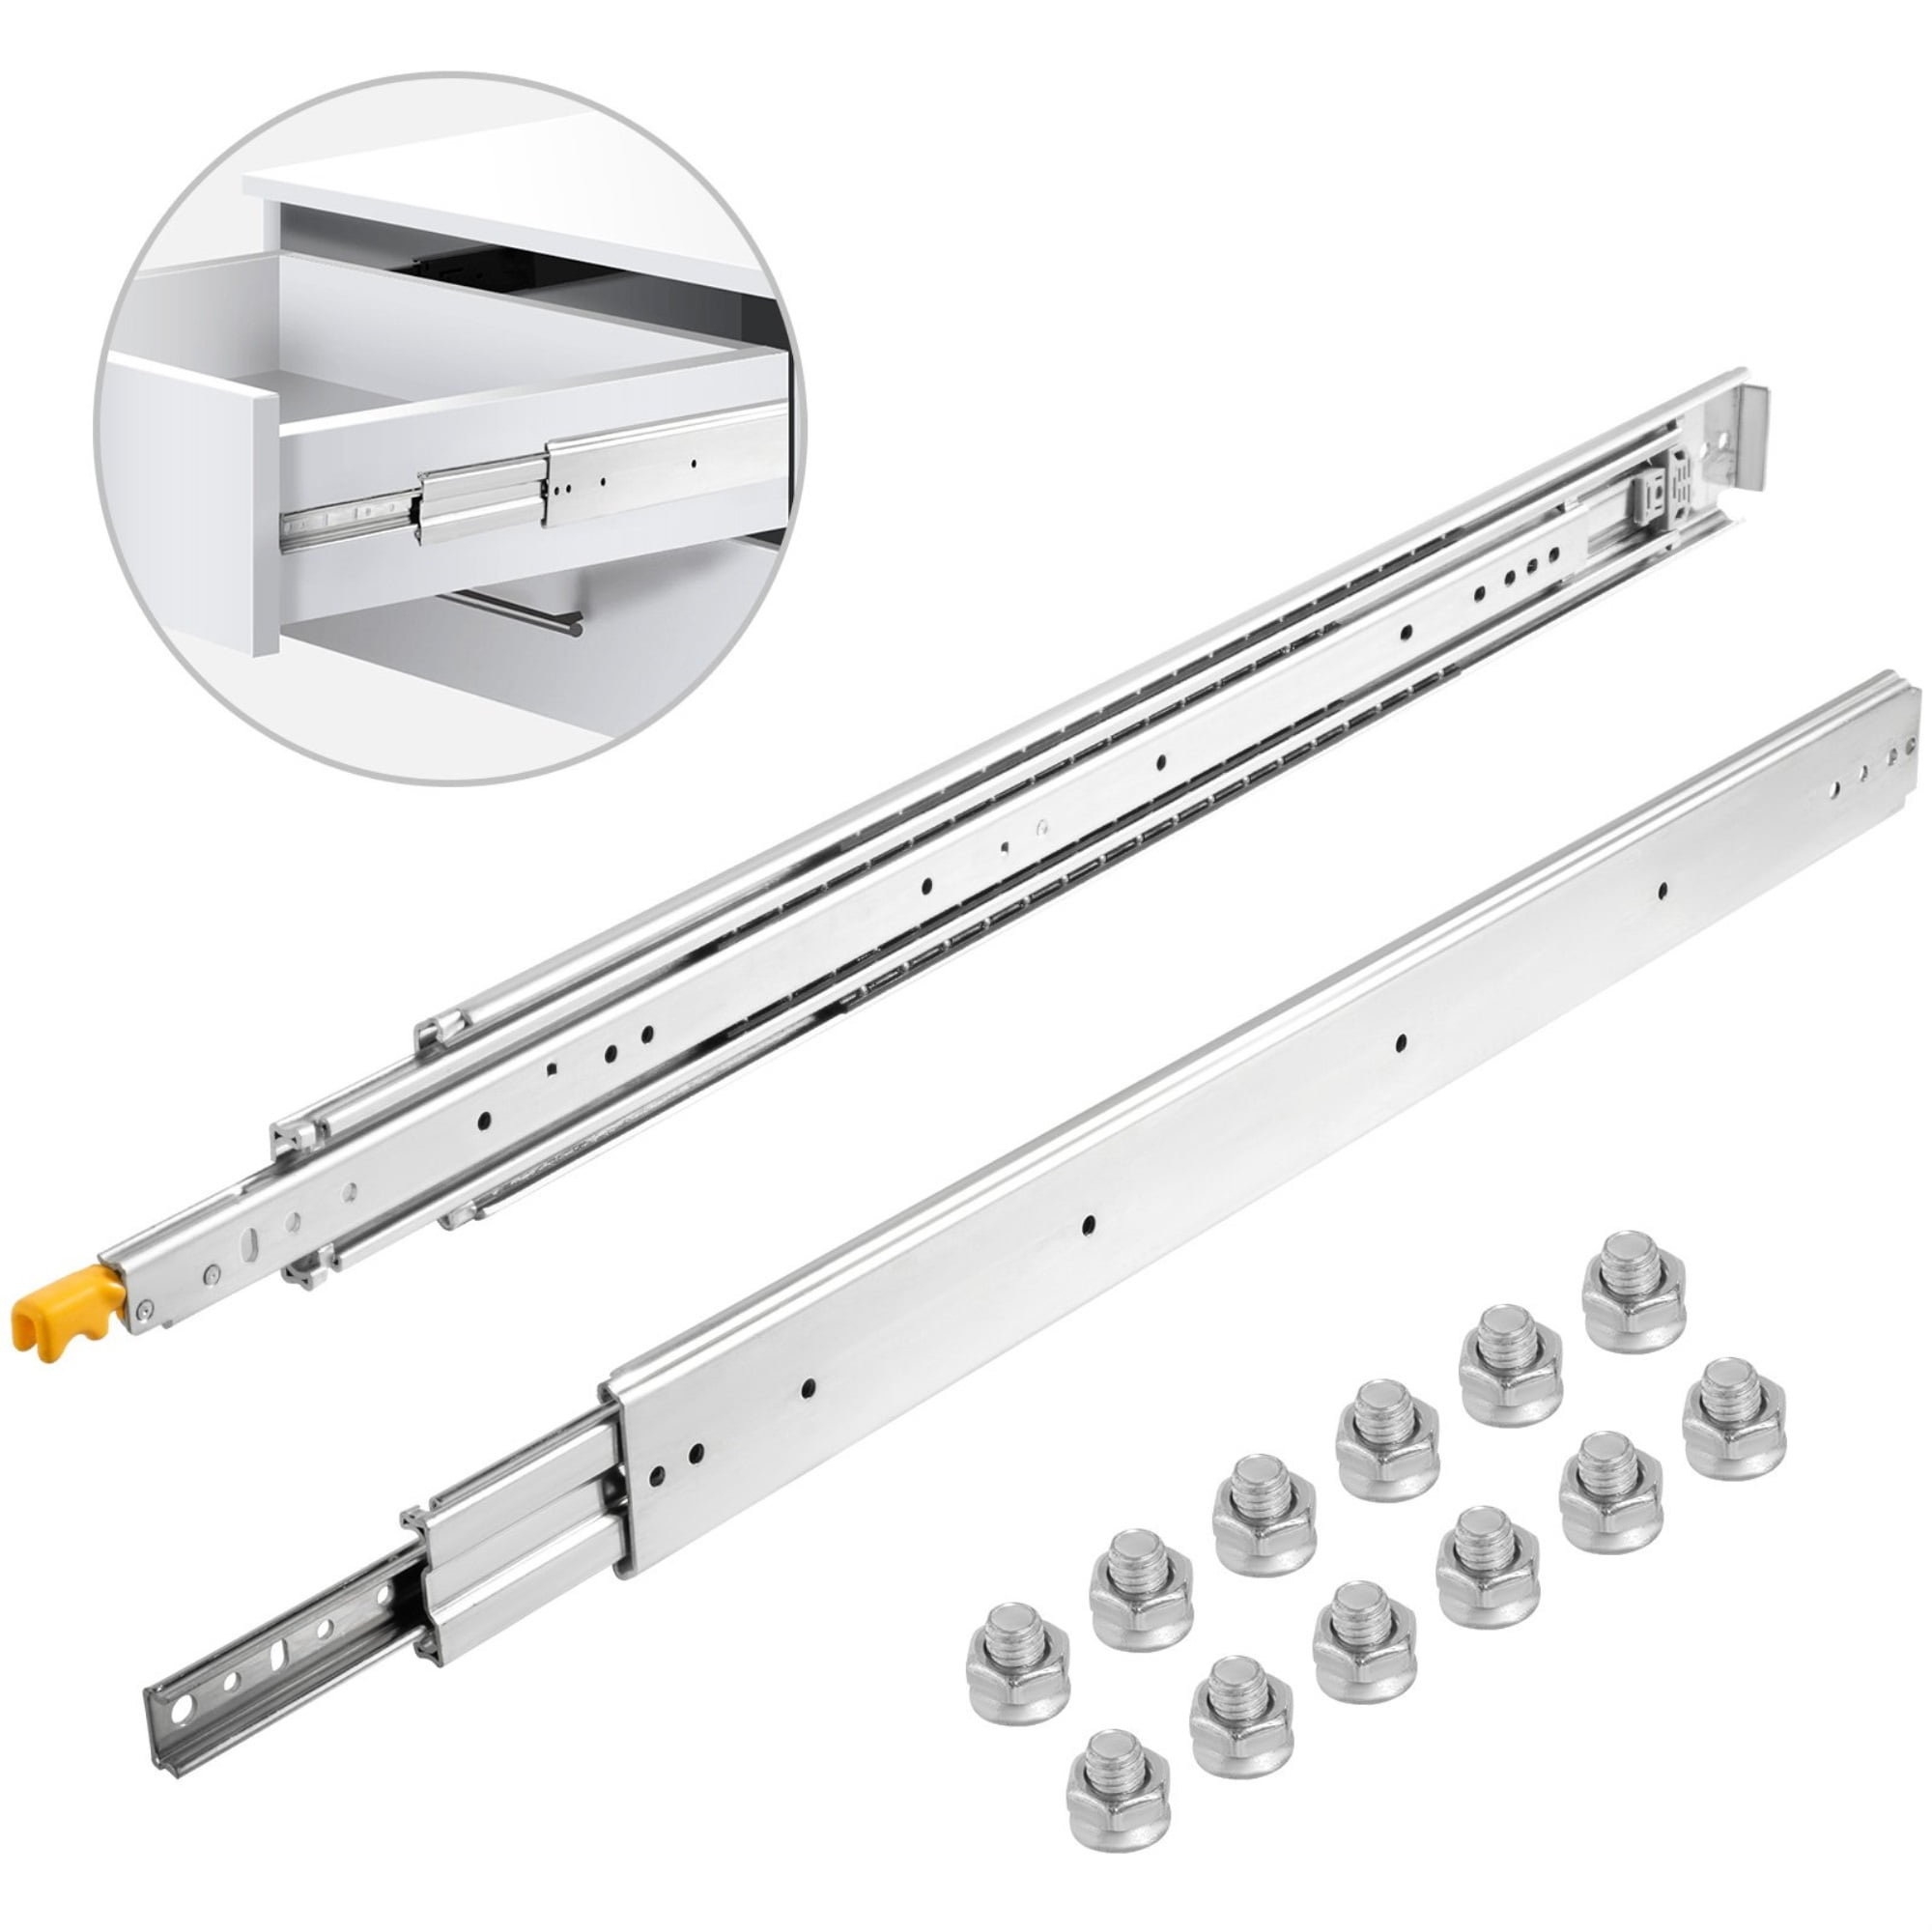 Drawer Slide 2Pcs Ball Bearing 3 Sections Buffer Slides Niture Guide Rail Full Extension Kitchen Cupboard Hardware Metal Steel,Silver,20In 